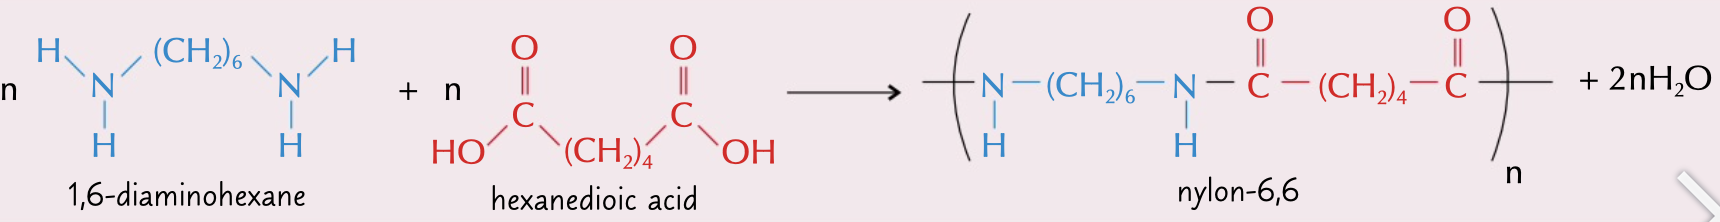 <p>nylon formed in condensation reaction between diamine and dicarboxylic acid</p><p>named by nylon-x,y where x and y are the number of carbon atoms in each monomer</p>